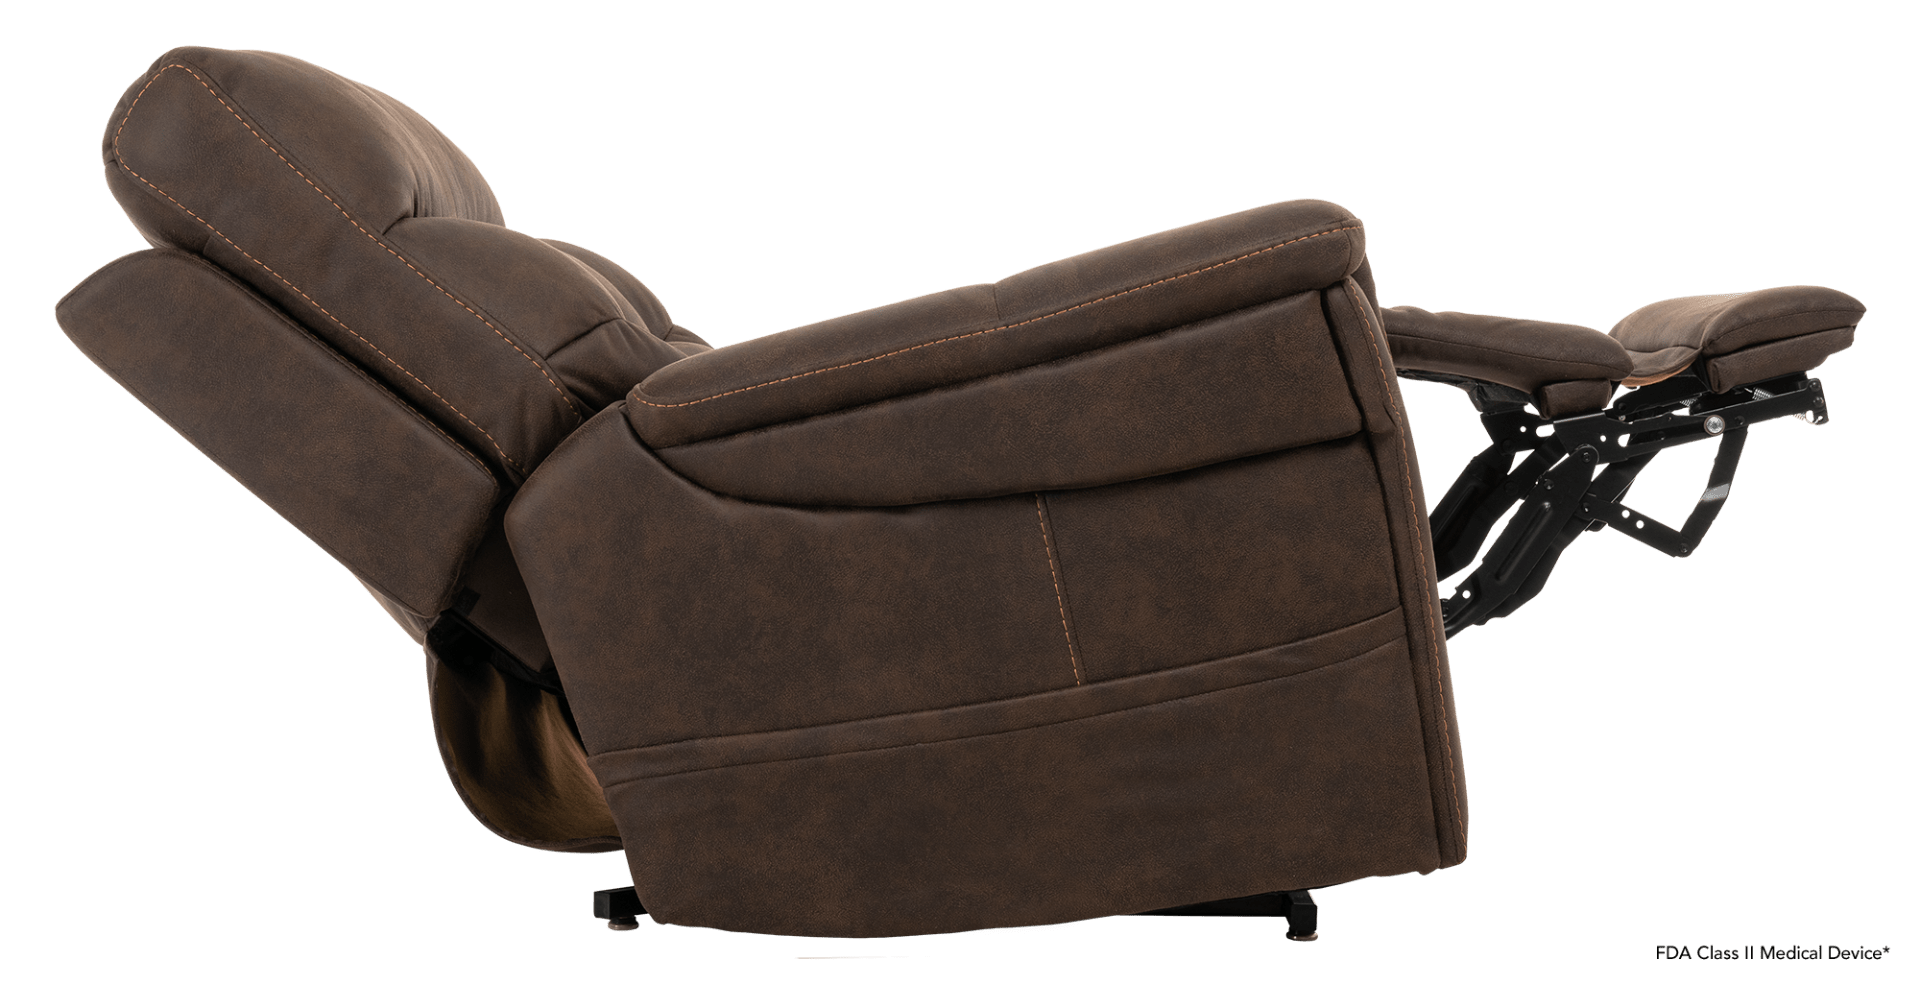 Pride Mobility VivaLift! Radiance Premium Lift Chair Recliner - PLR-3955 - Midwest DME Supply